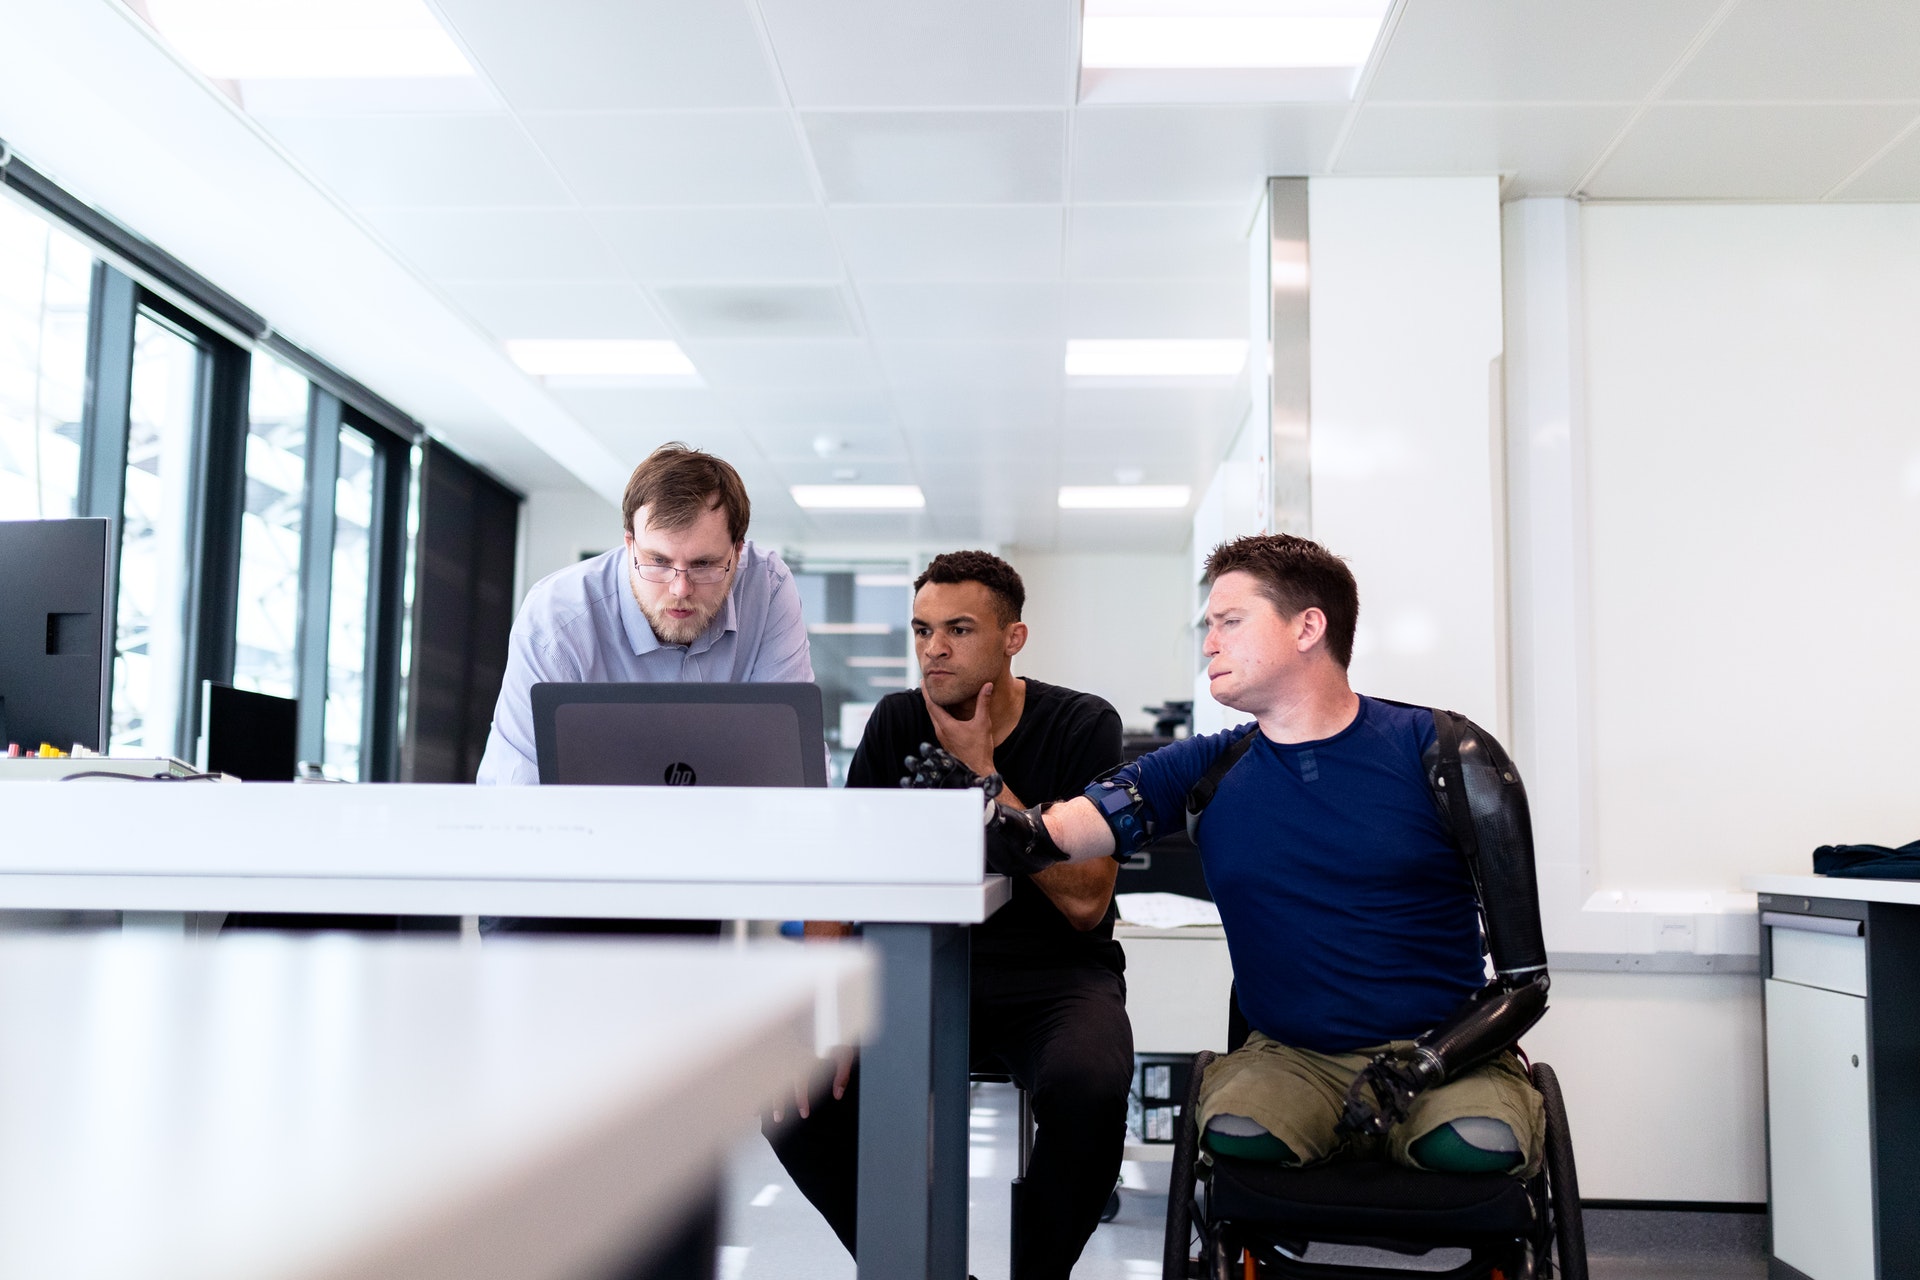 Three men looking at the computer and discussing. One man is disabled as he is on the wheel chair without legs and two bionic arms.